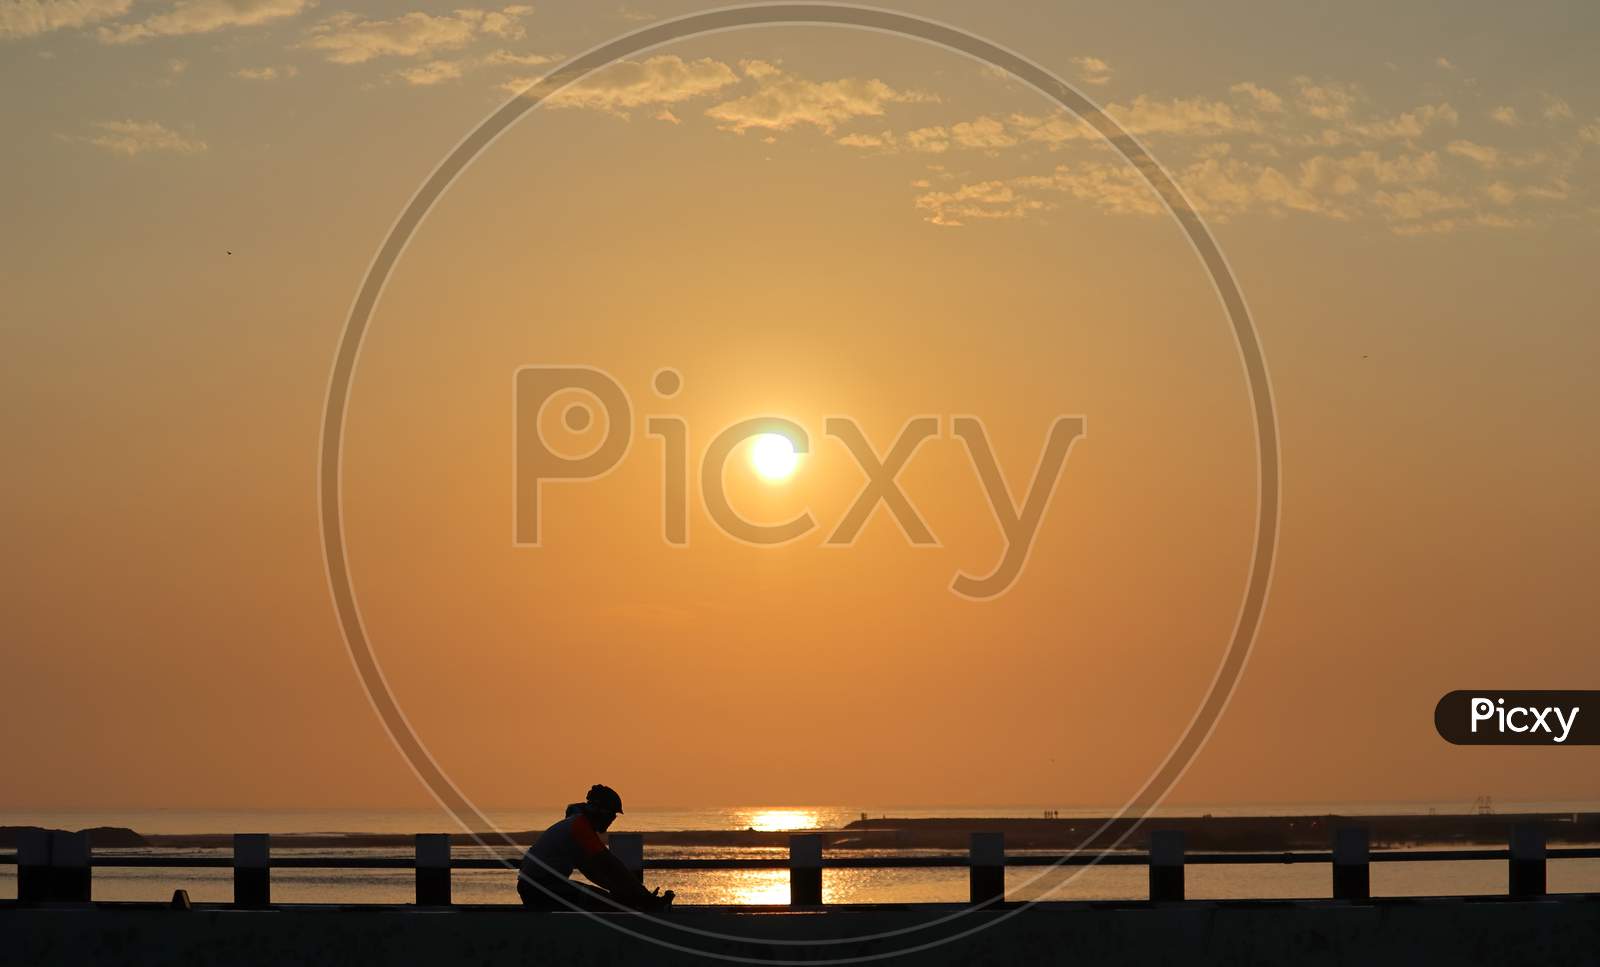 A Silhouette Sport Man Walks The Cycle From The Bridge Over The Seashore In The Morning